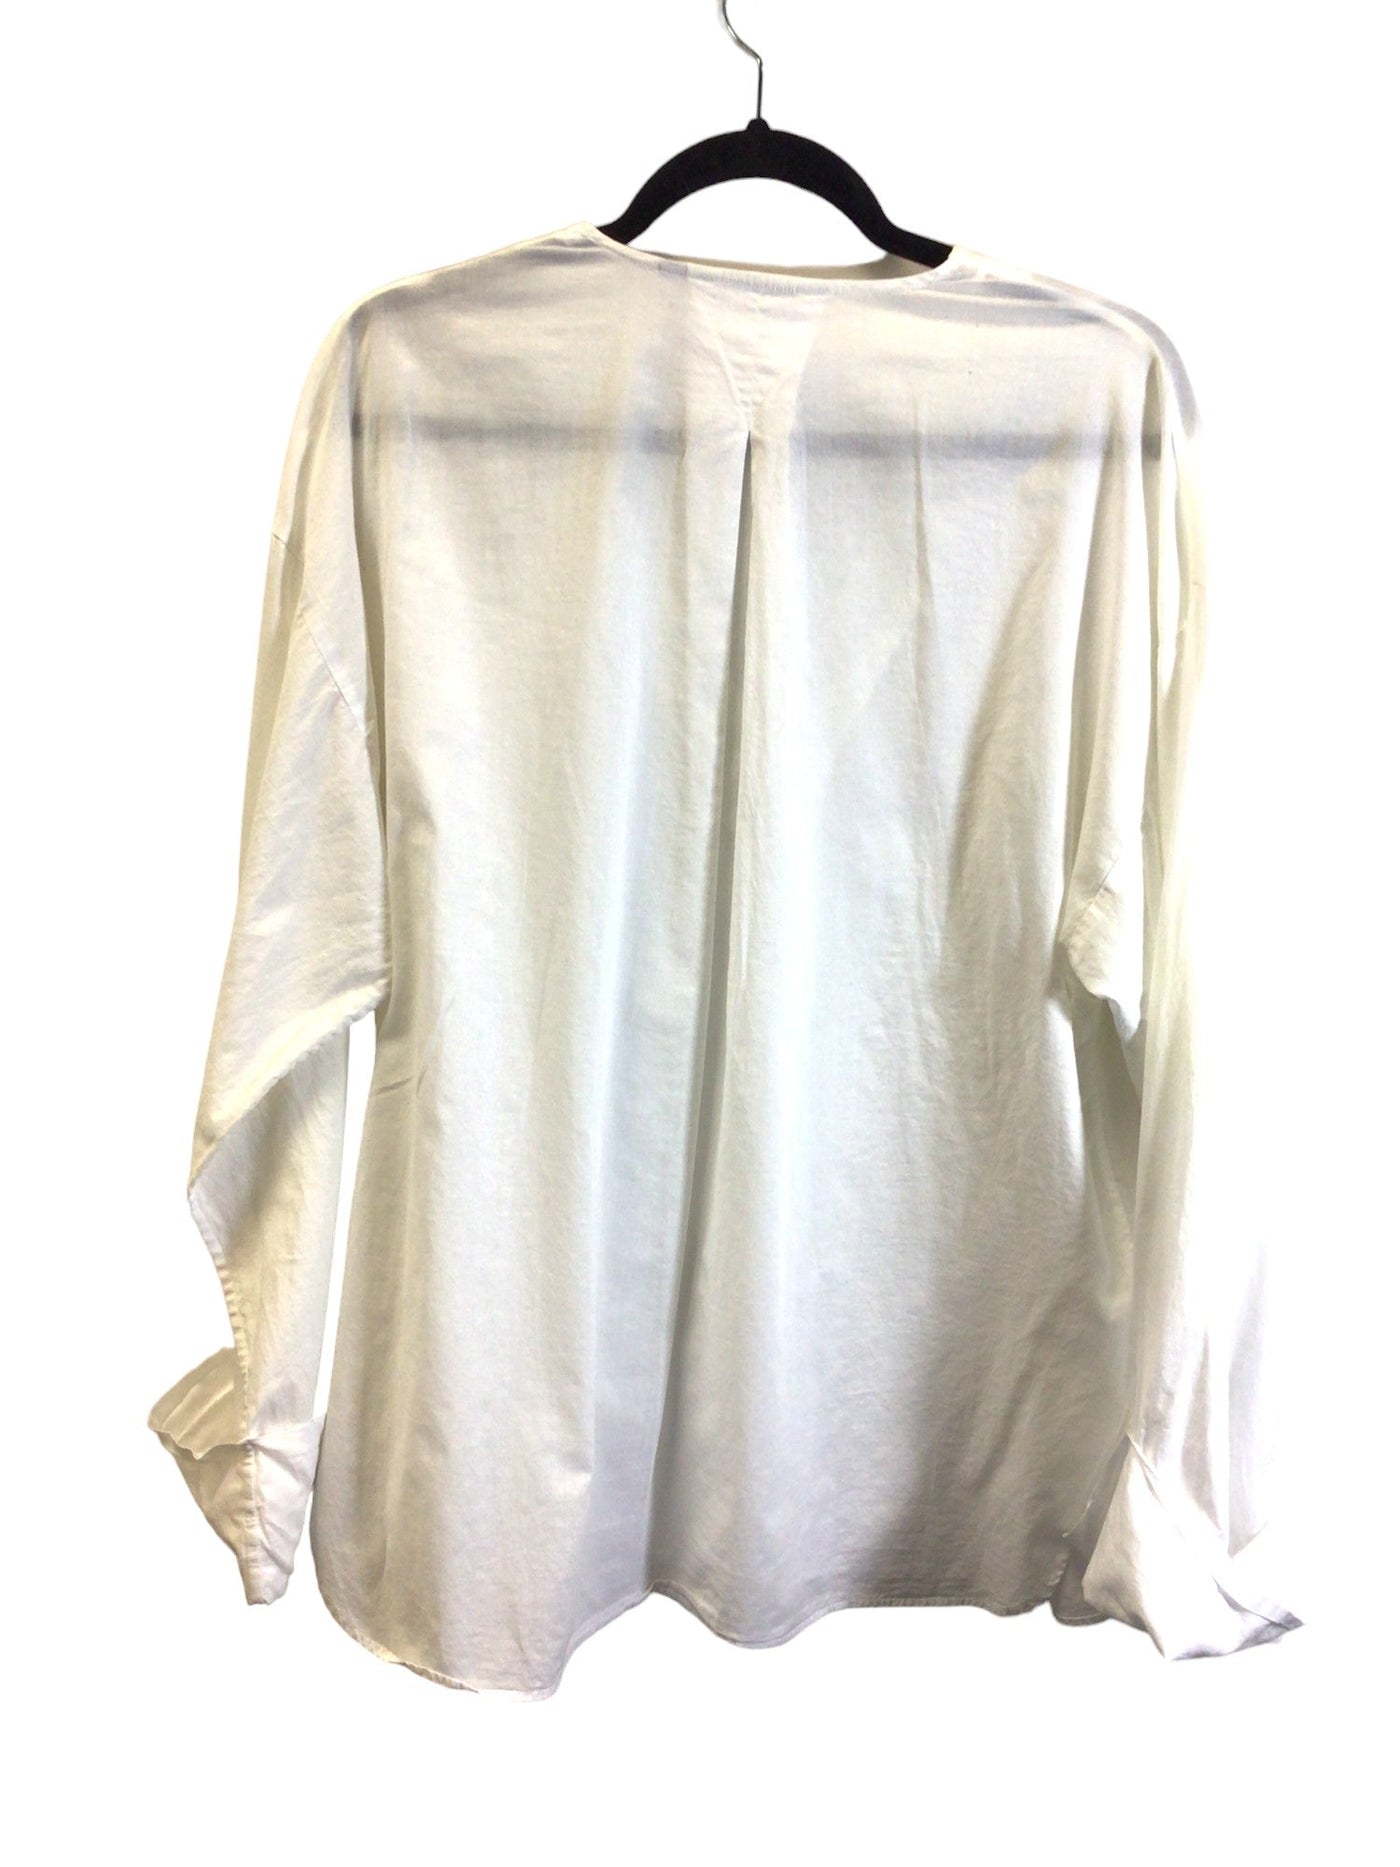 & OTHER STORIES Women Blouses Regular fit in White - Size 8 | 39.99 $ KOOP